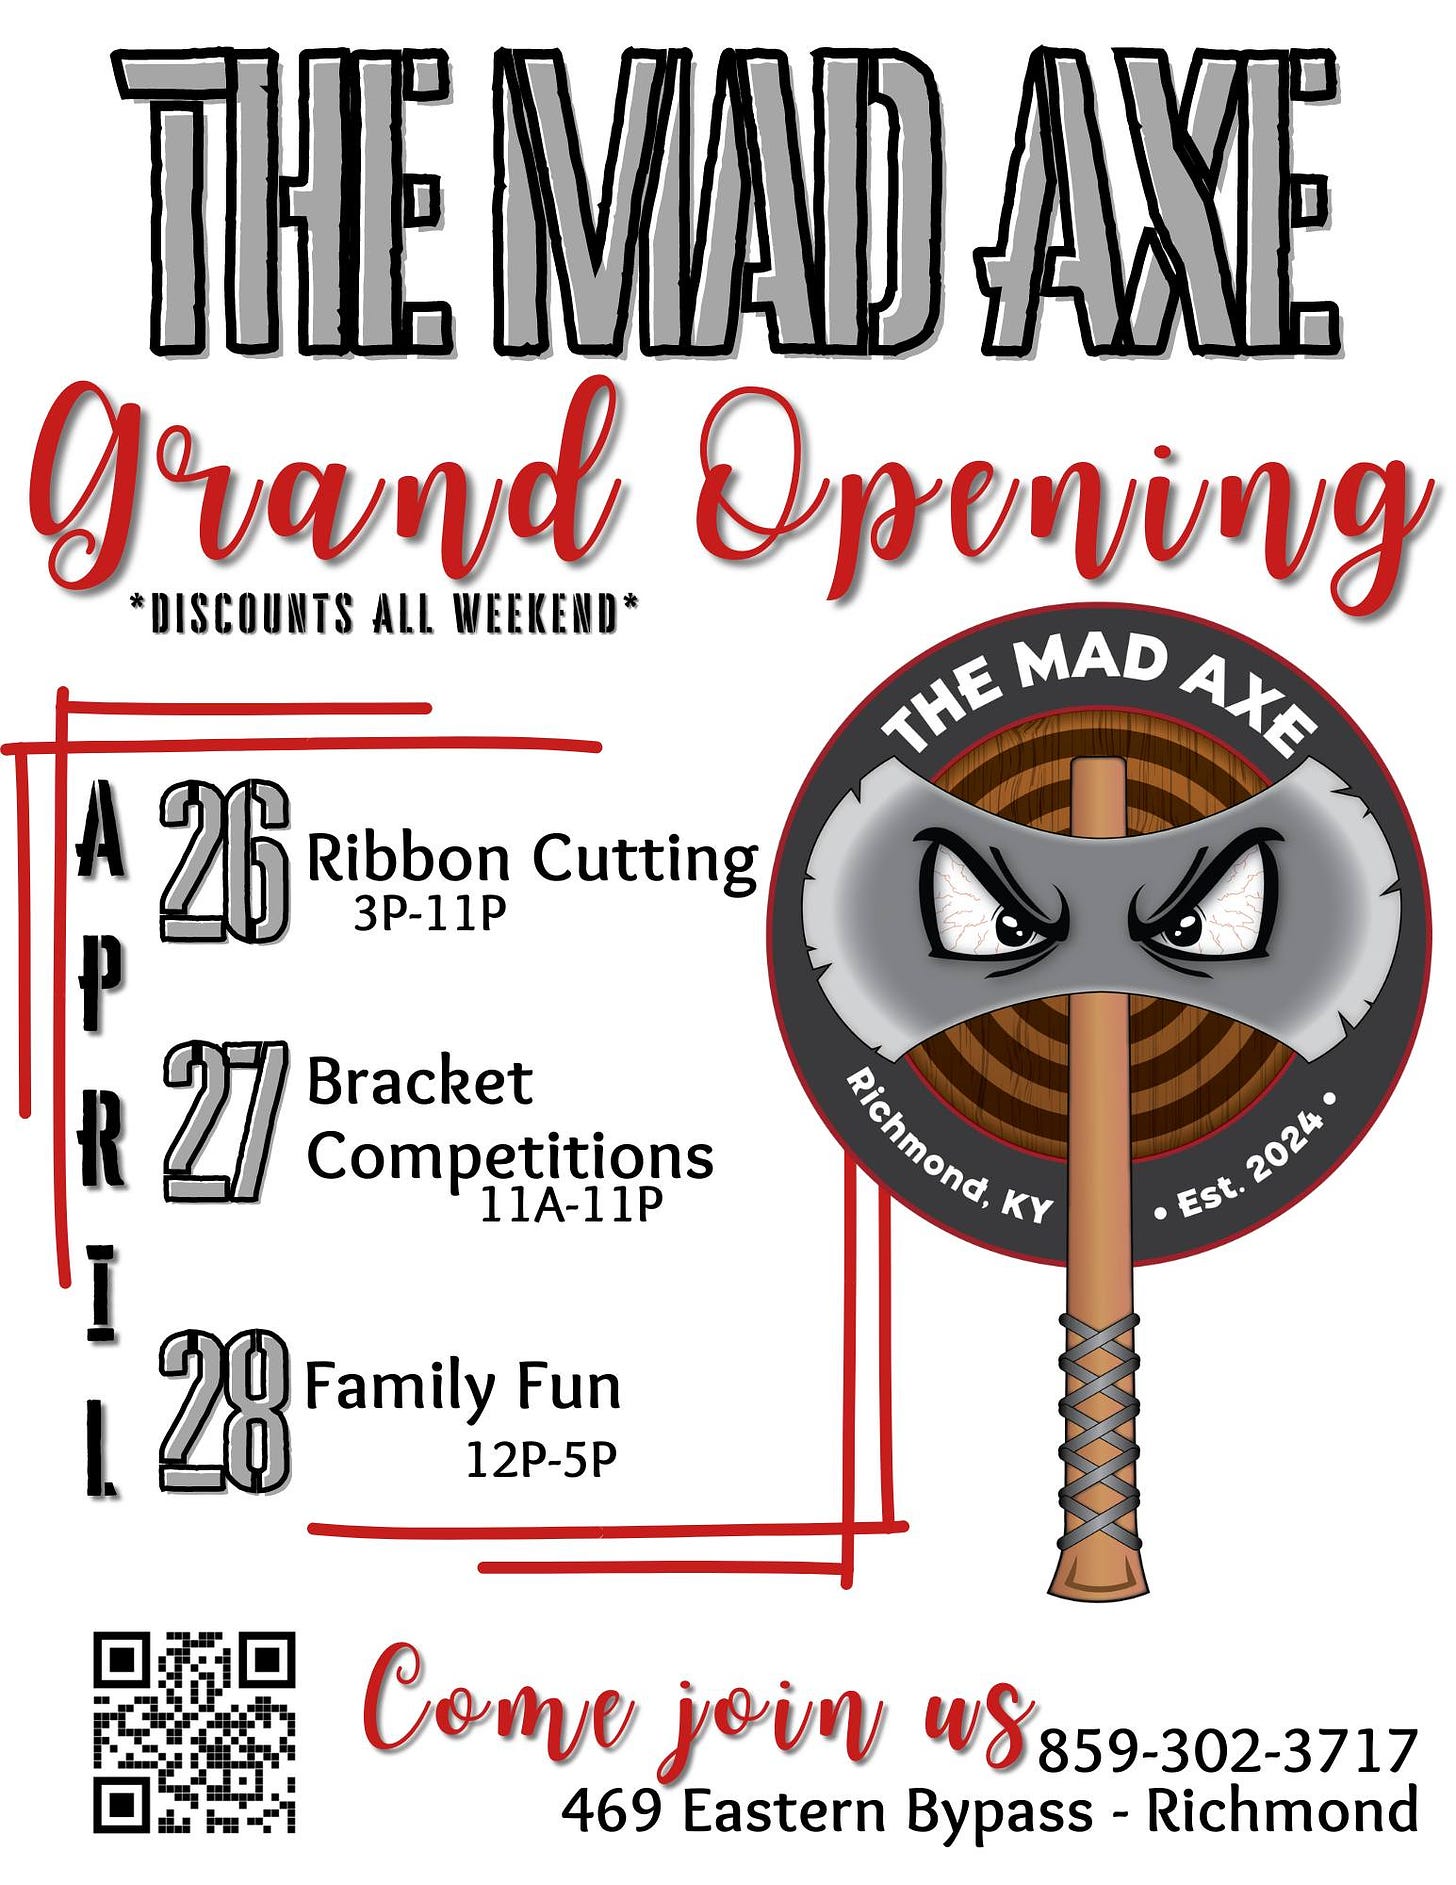 May be an image of text that says 'THE MAD AXE grand Opening *DISCOUNTS ALL WEEKEND* THE MAD AXE A 26 Ribbon Cutting 3P-11P 27 Bracket Competitions 11A-11P Richmond neлρoχa KY •Est.2024* Est. Est.2024 Est.2024 2024 28 Family Fun 12P-5P Come join ws 859-302-3717 469 Eastern Bypass- Richmond'